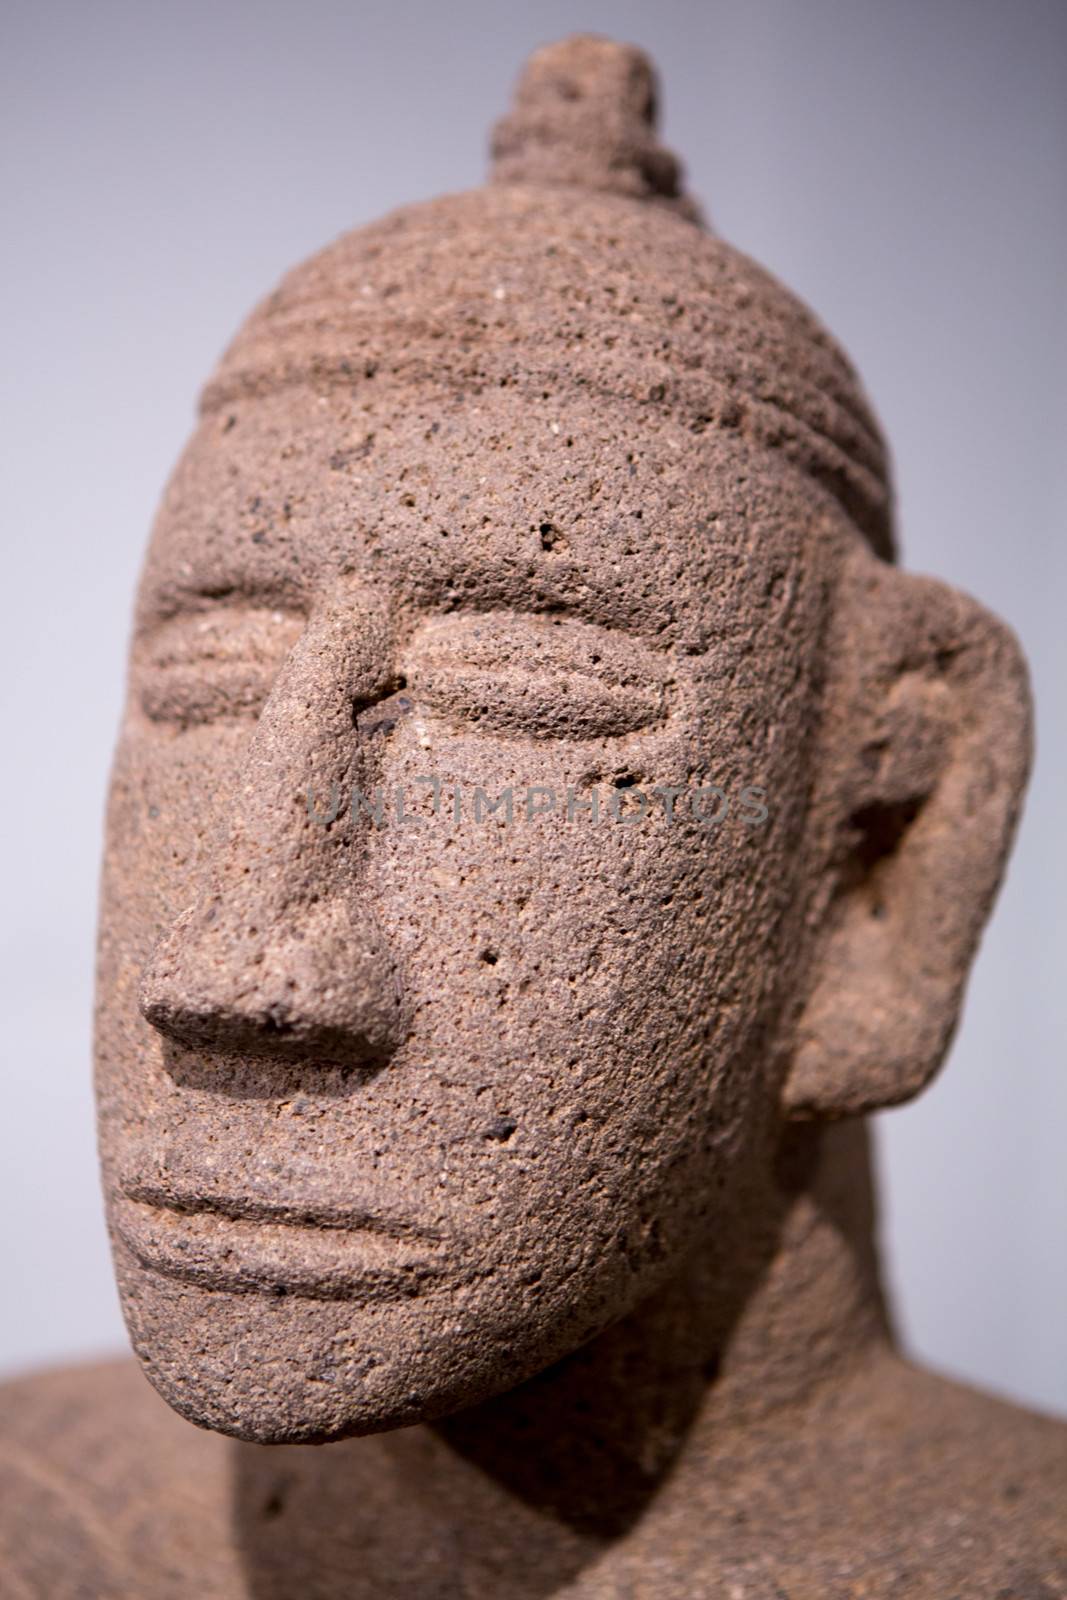 Detail of the head of a Mayan sculpture found in Costa Rica. Ancient Maya art refers to the material arts of the Maya civilization, an eastern and south-eastern Mesoamerican culture that took shape in the course of the later Preclassic period (500 BC to 200 AD).